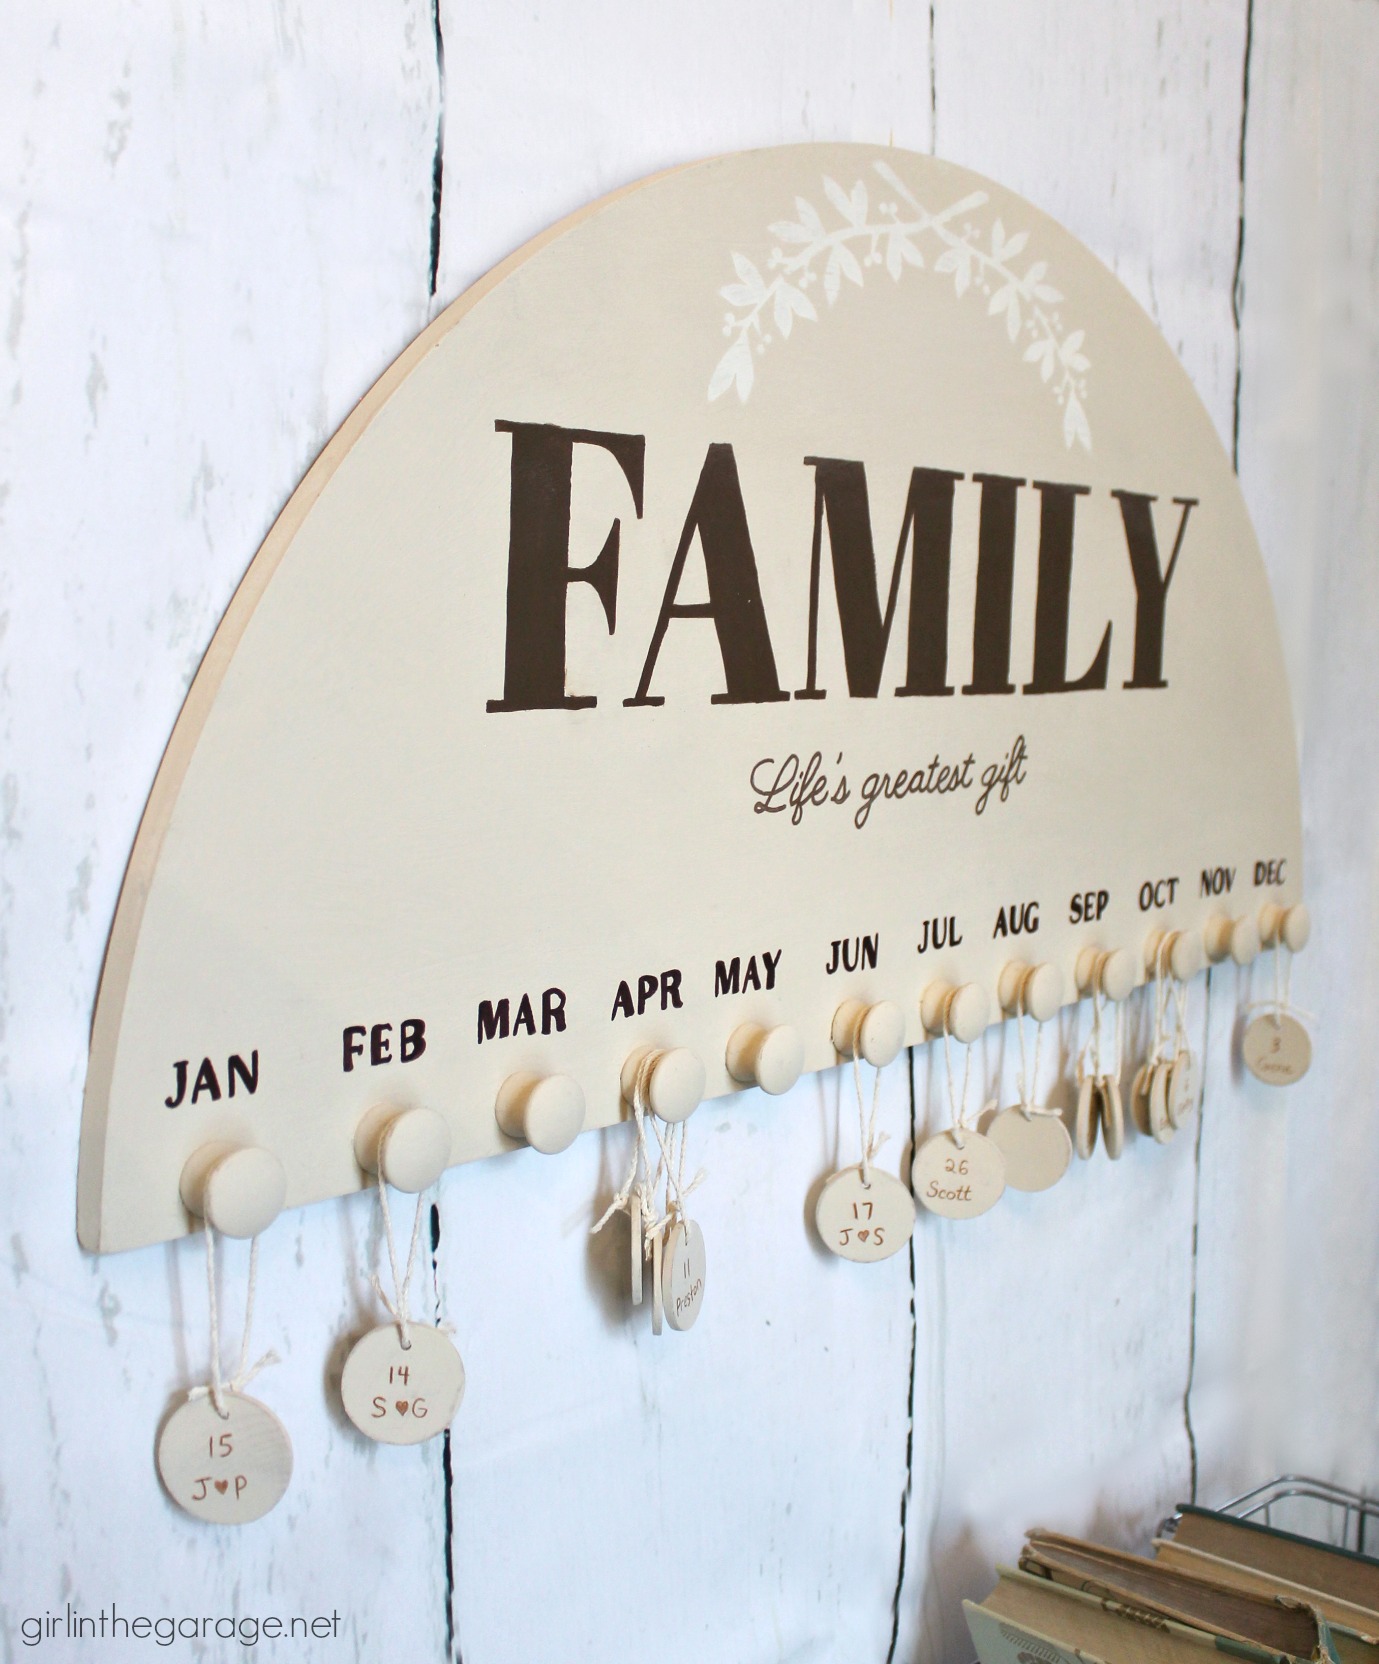 Thrifted art to DIY family birthday calendar - Remember important dates with a keepsake wall calendar - Step by step tutorial by Girl in the Garage